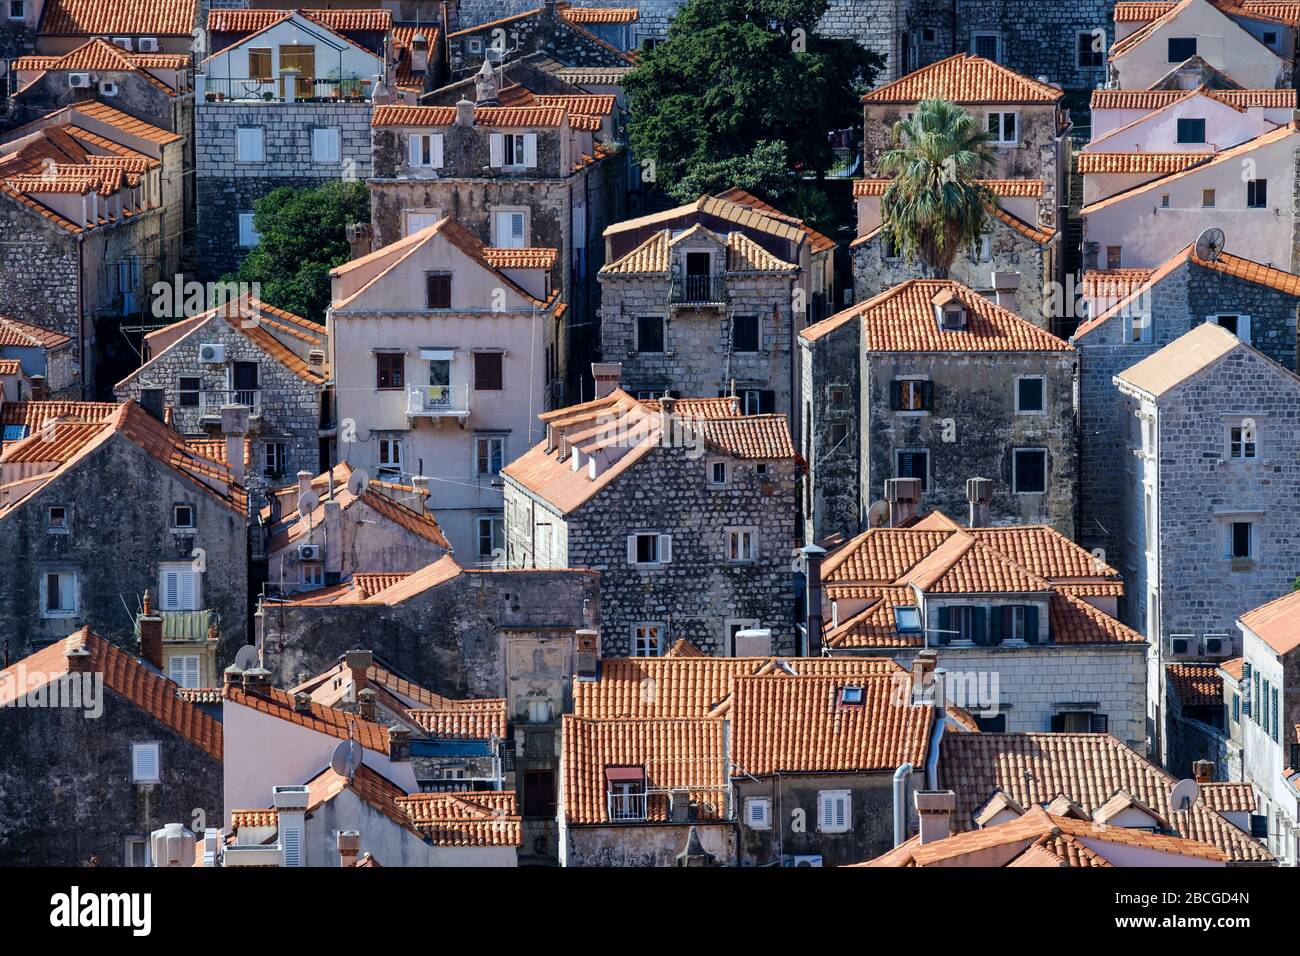 A view across Dubrovnik Old town. It shows the densely packed homes and buildings and their distinctive red tiled roofs Stock Photo